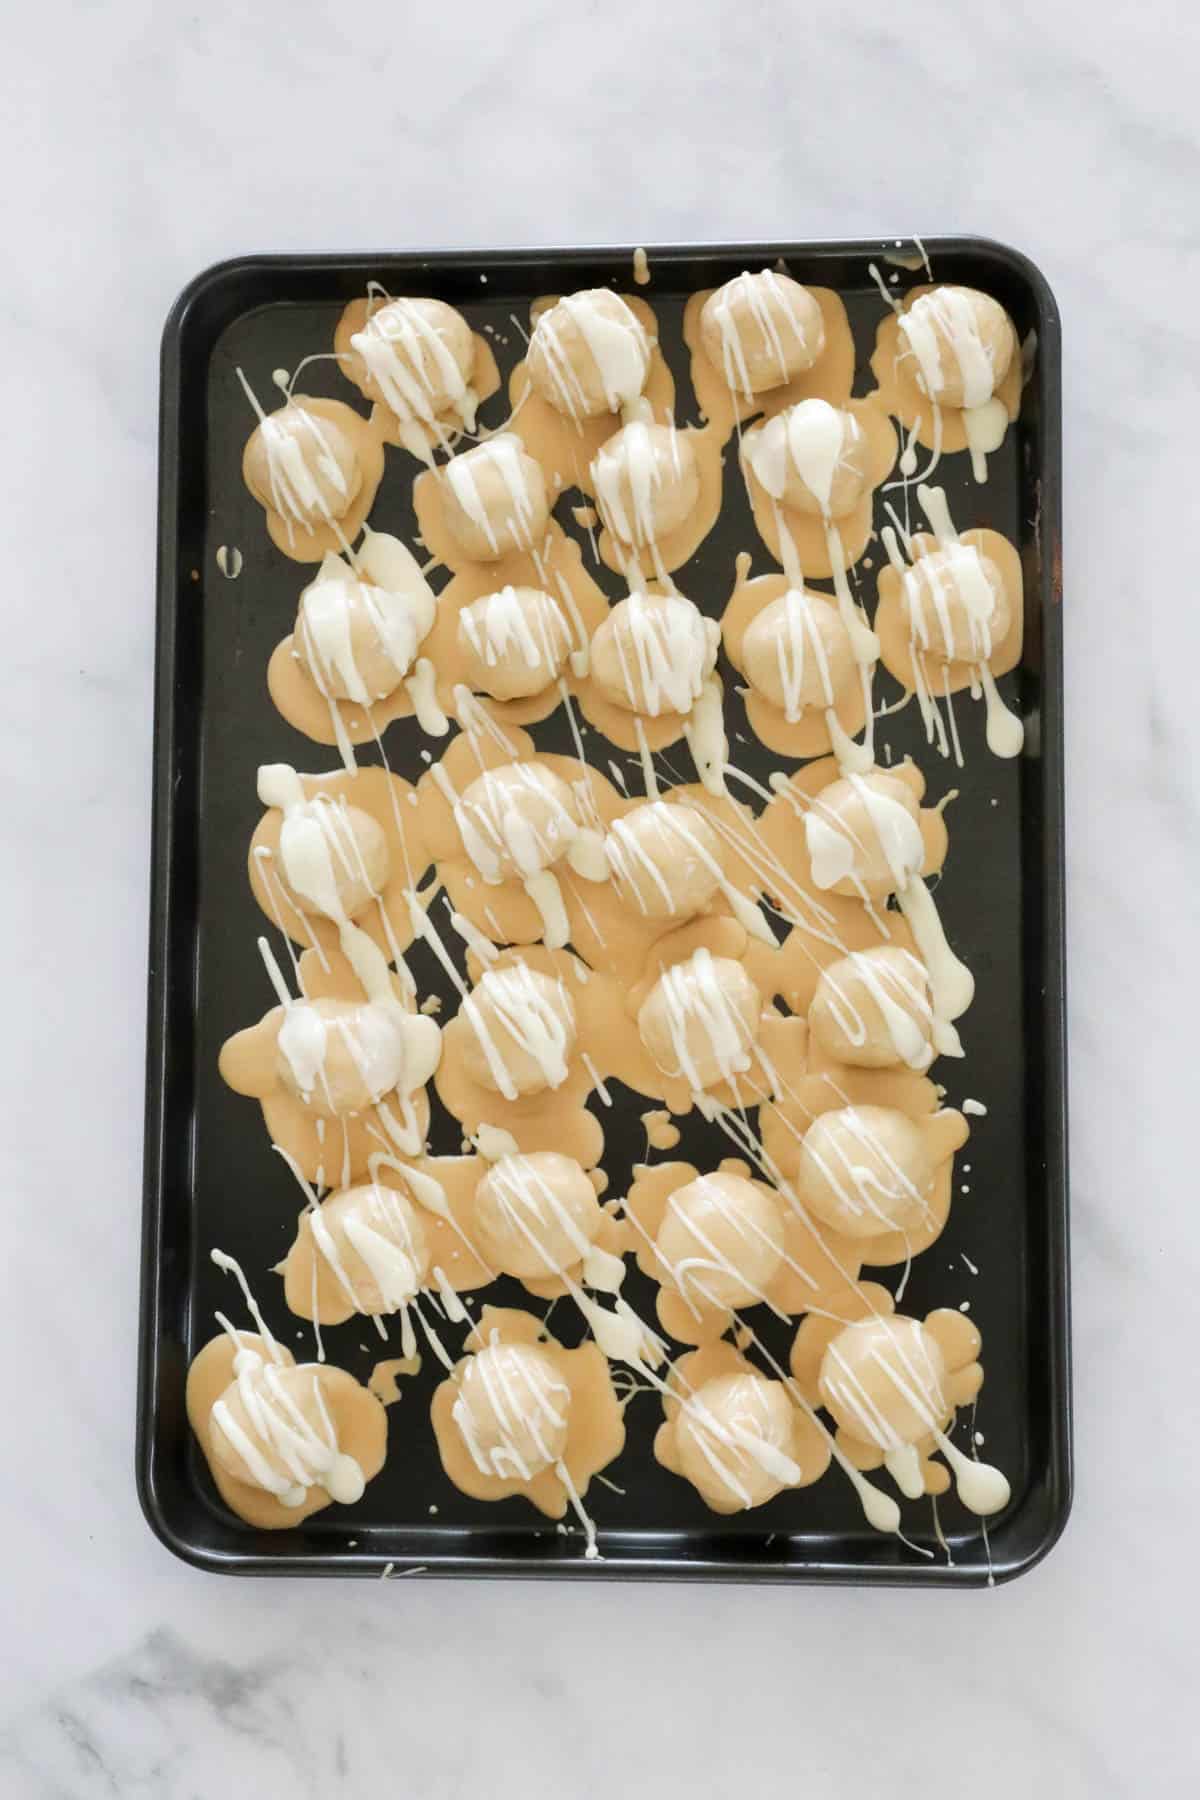 Cheesecake balls rolled in melted caramel chocolate and then drizzled with white chocolate, served on a tray.